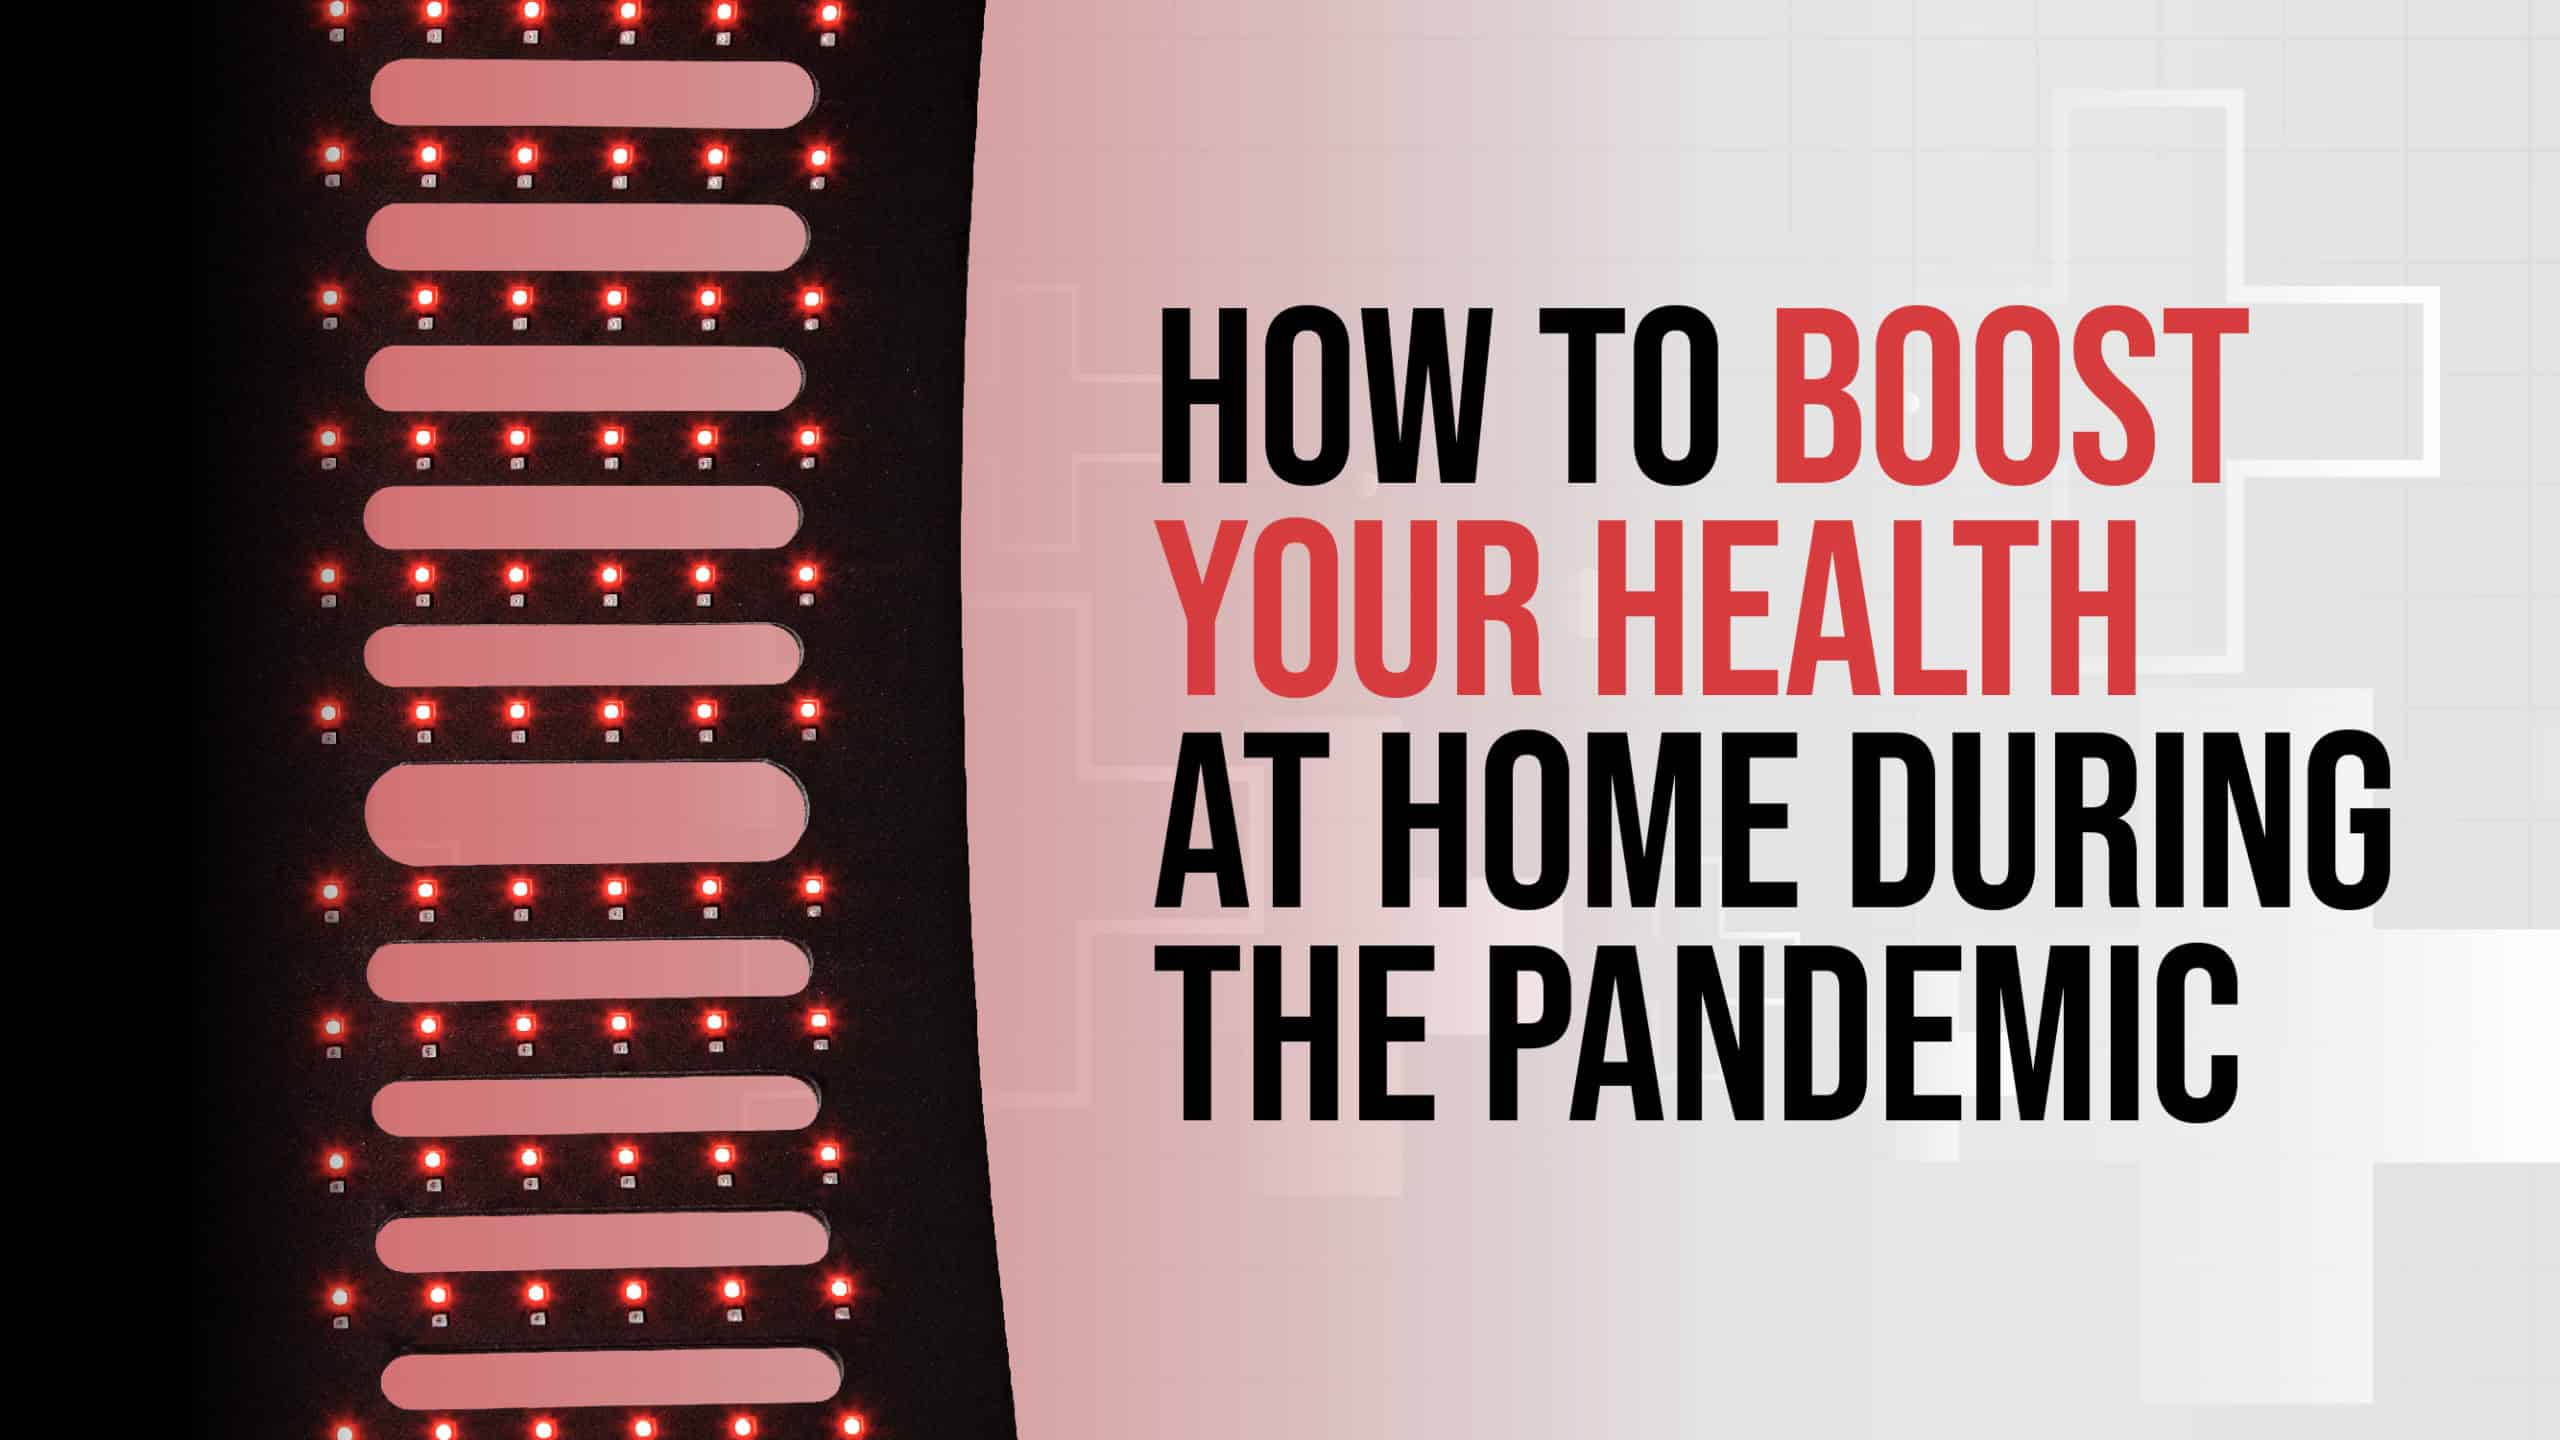 A BodyGaurd device that delivers red light therapy and helps you boost your health at home.